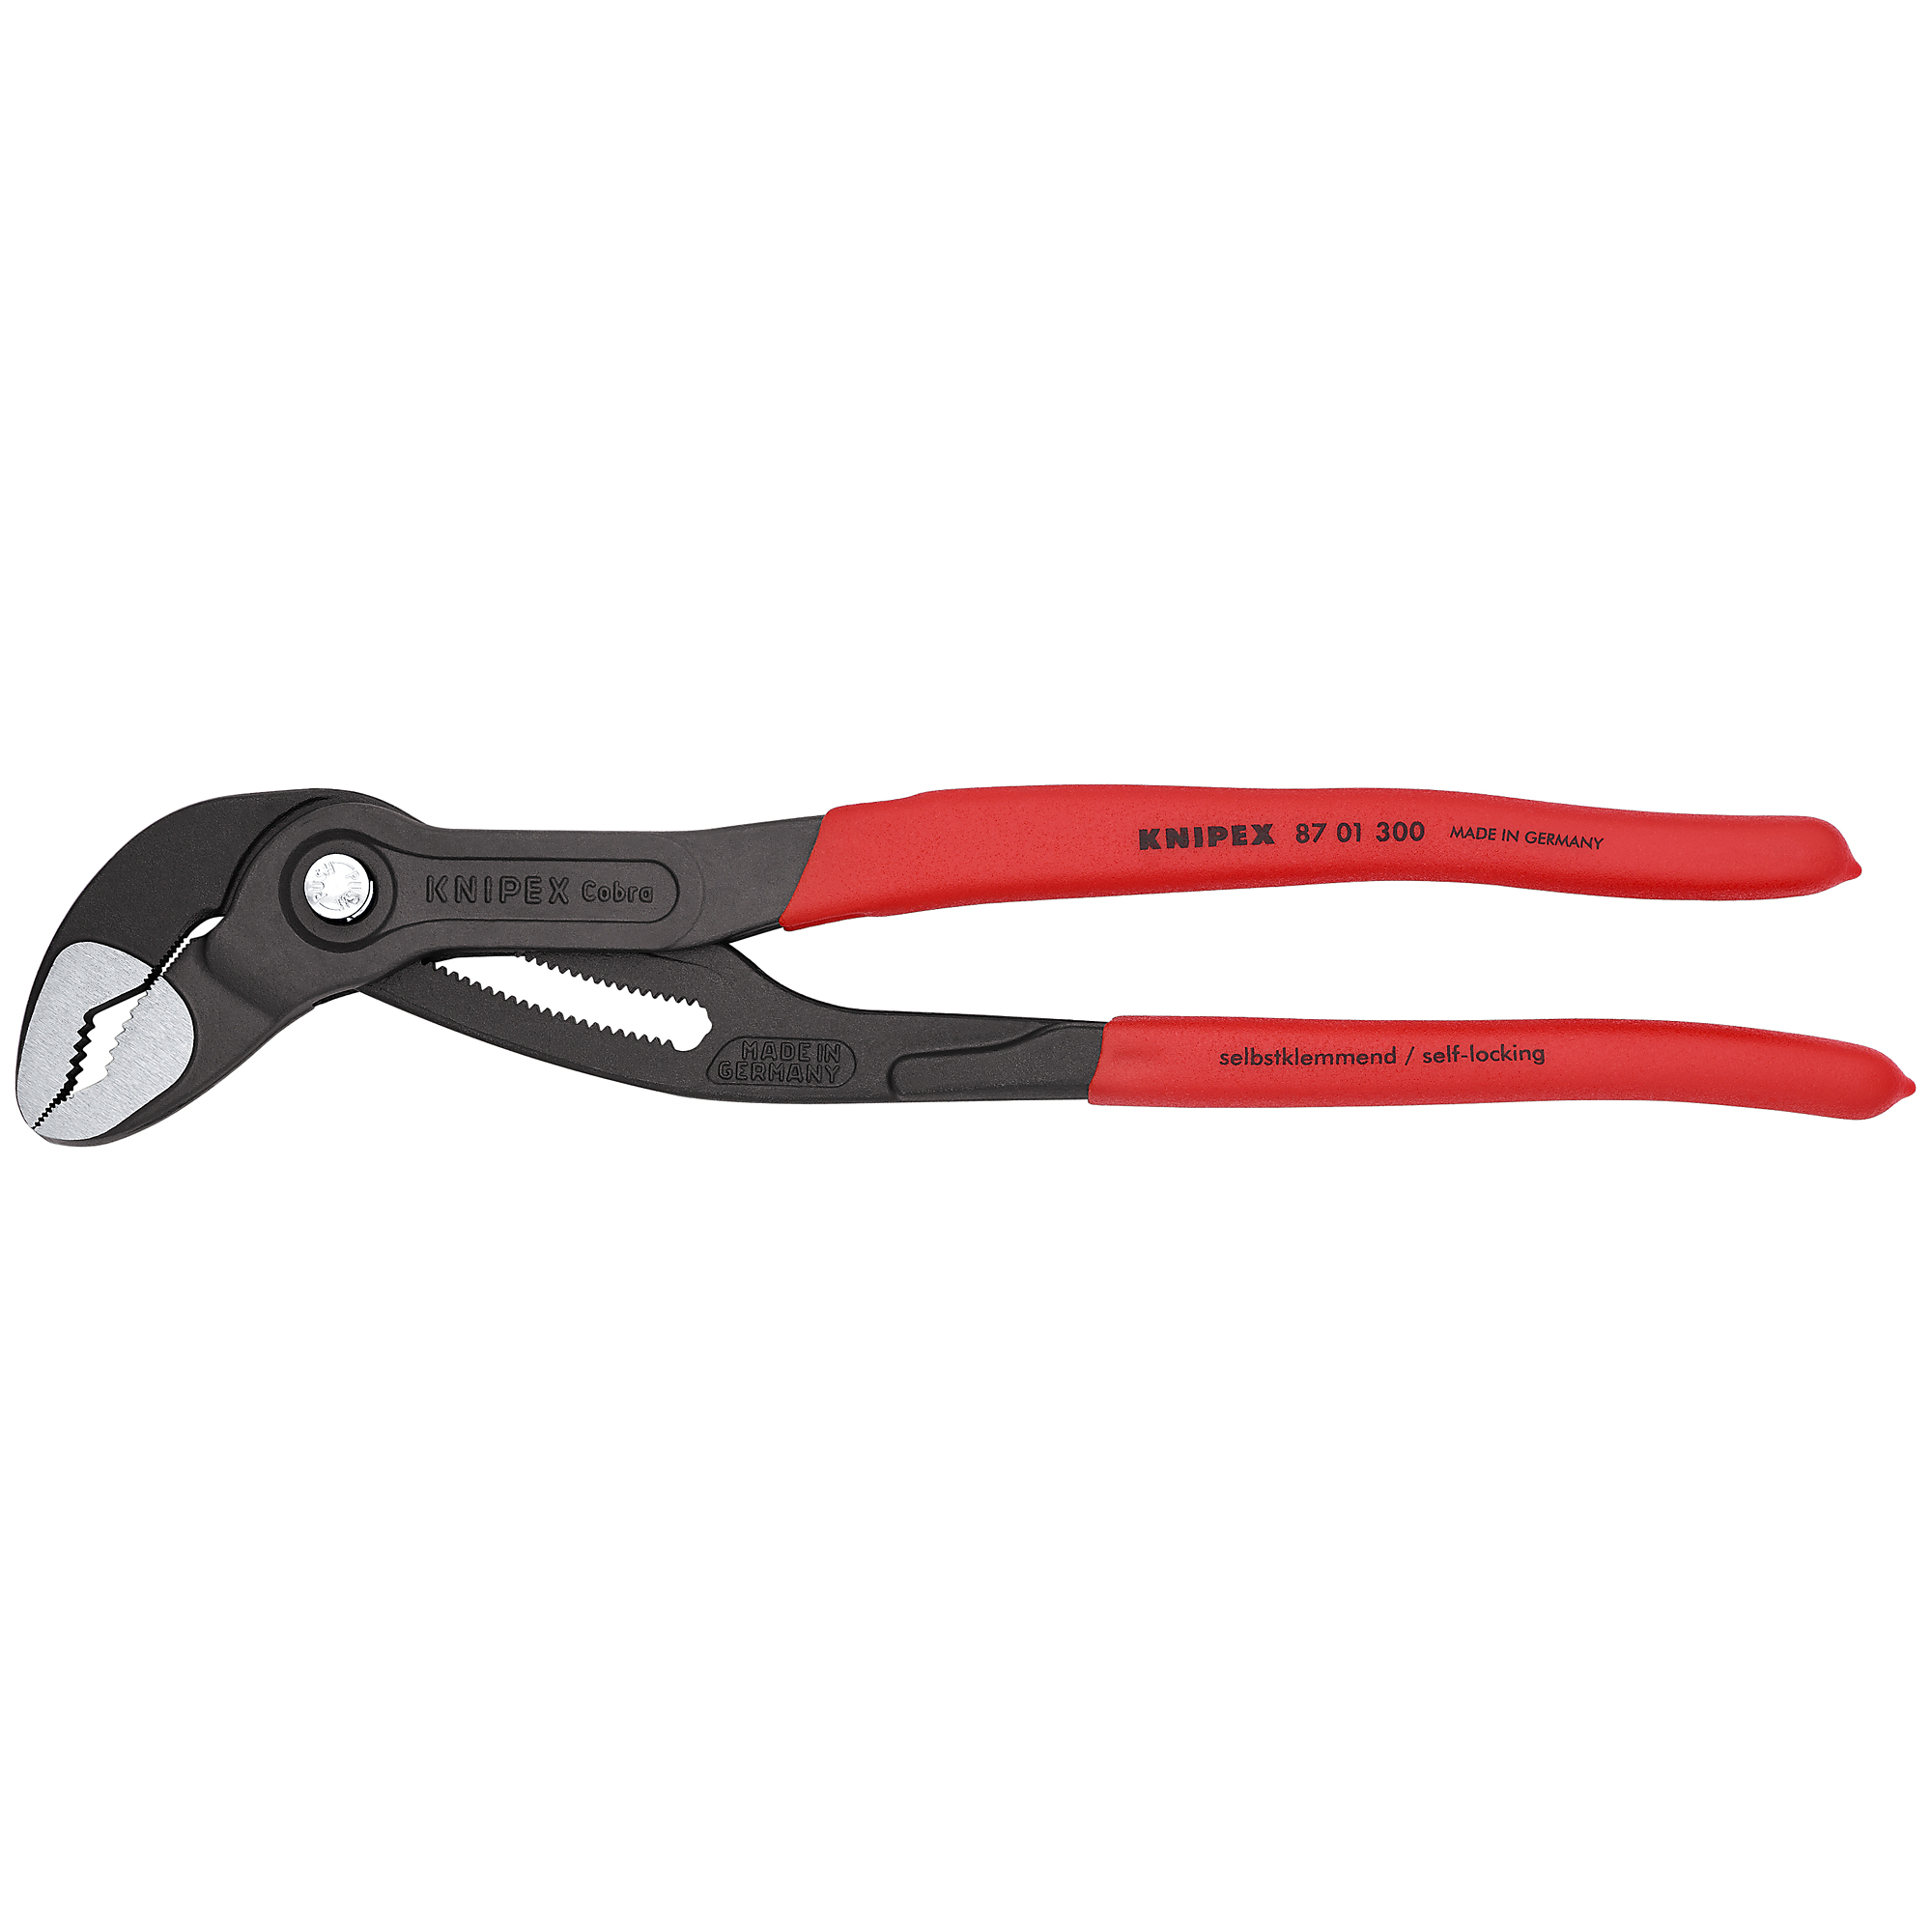 KNIPEX Cobra , Cobra Water Pump Pliers, Non-slip plastic, 12Inch, Pieces (qty.) 1 Material Steel, Jaw Capacity 2.75 in, Model 87 01 300 SBA